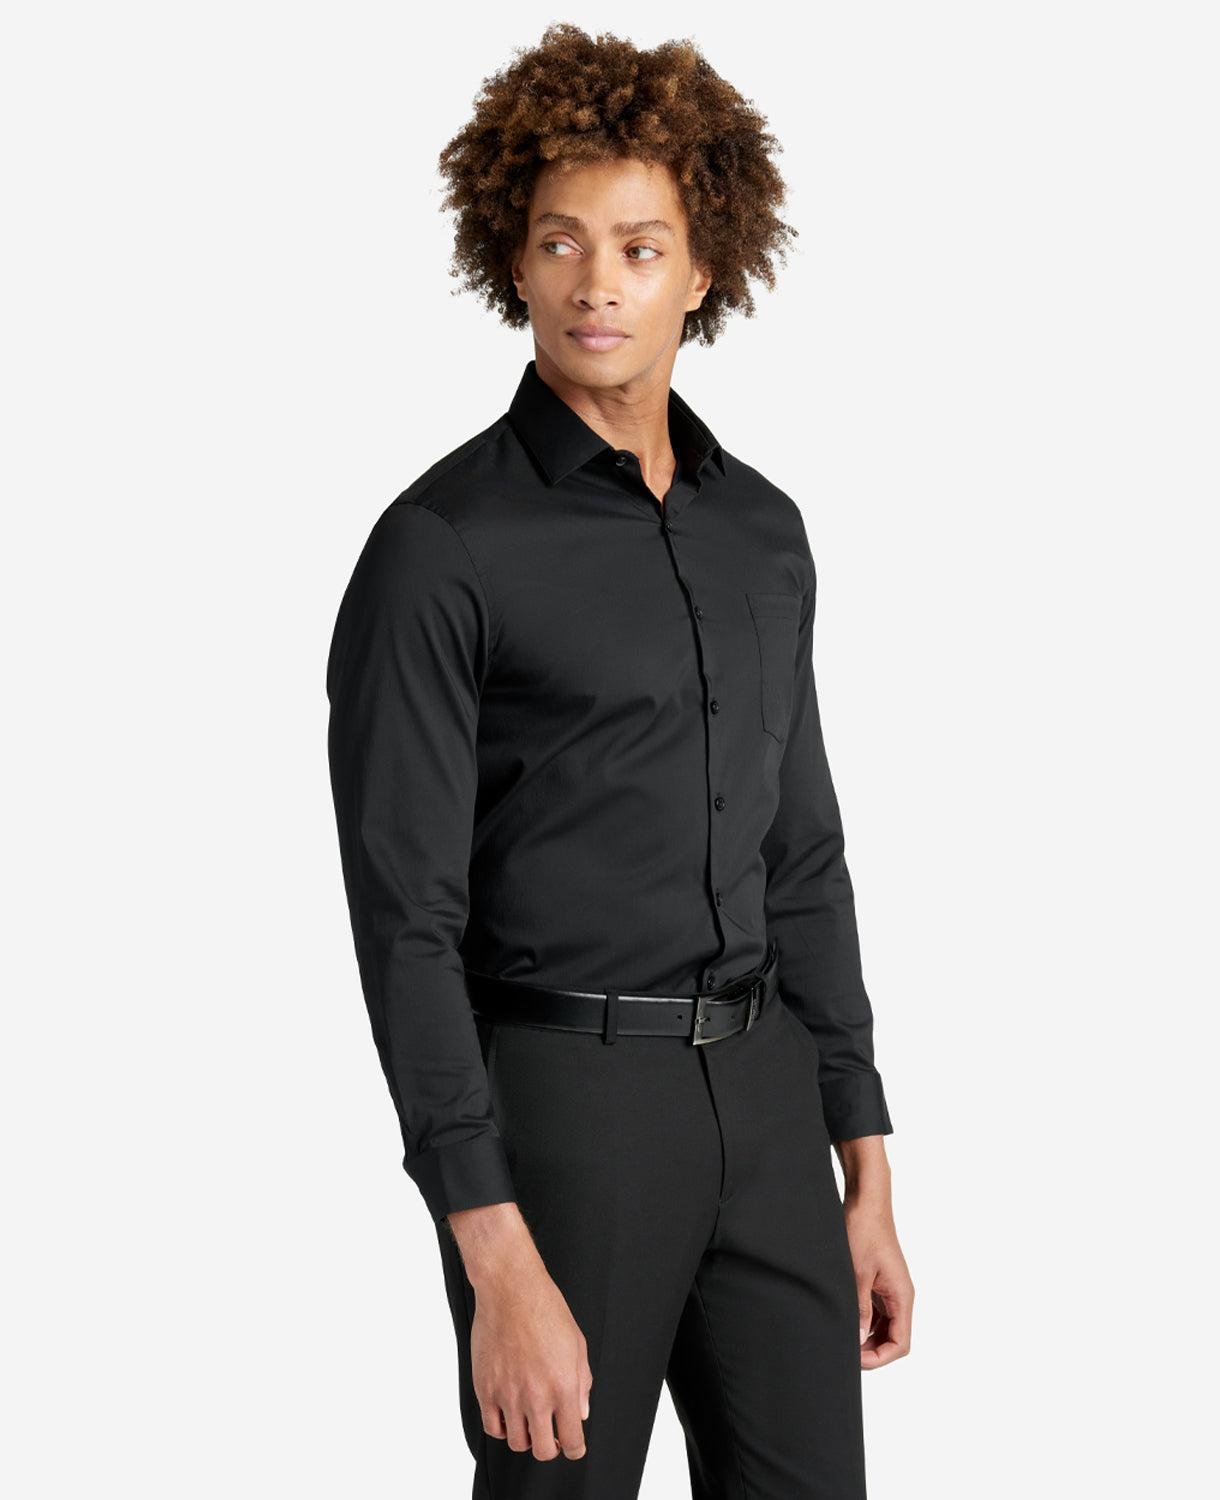 Slim Fit Kenneth Cole Sustinable Stretch Collar Solid Dress Shirt by KENNETH COLE